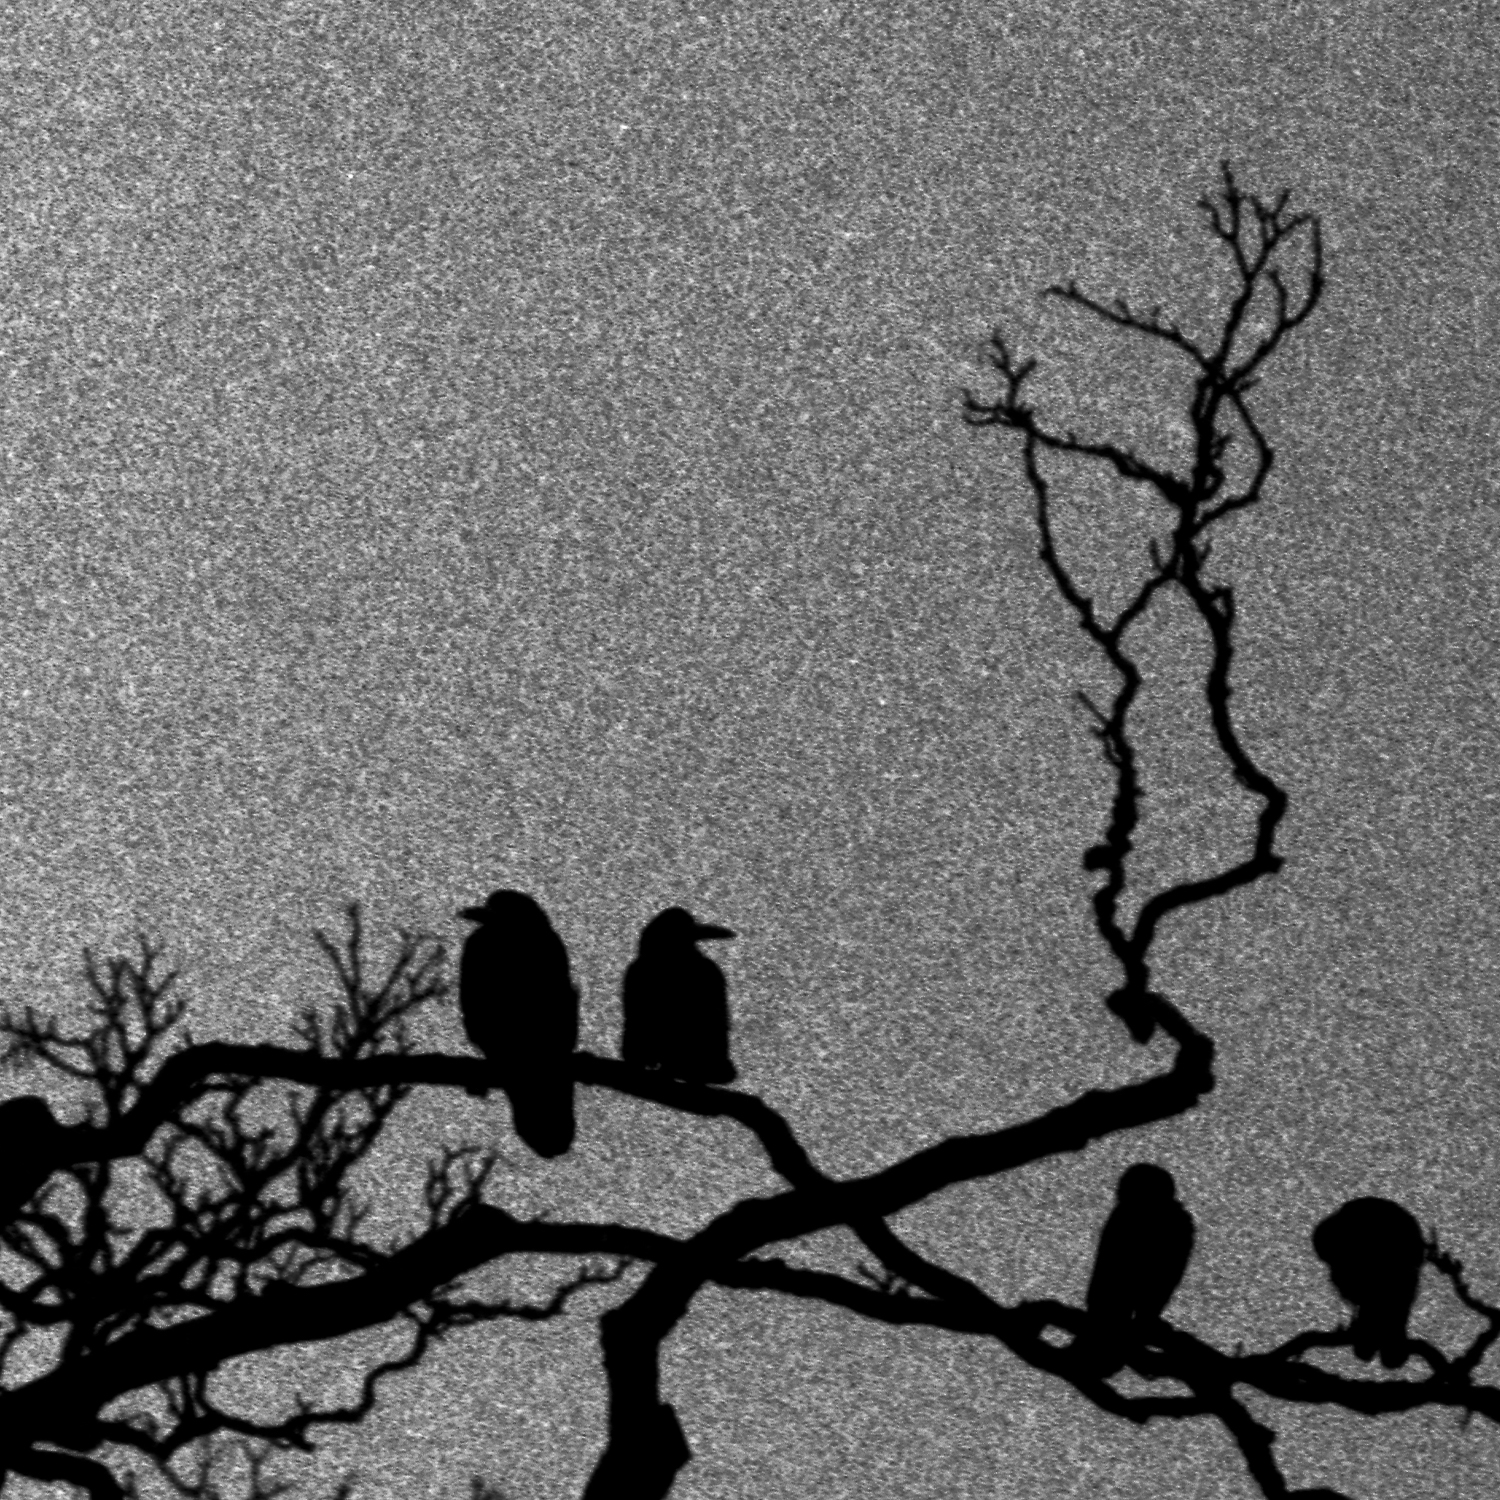 Rooks 11 - part of a series shot on 35mm film at dusk around Dorset